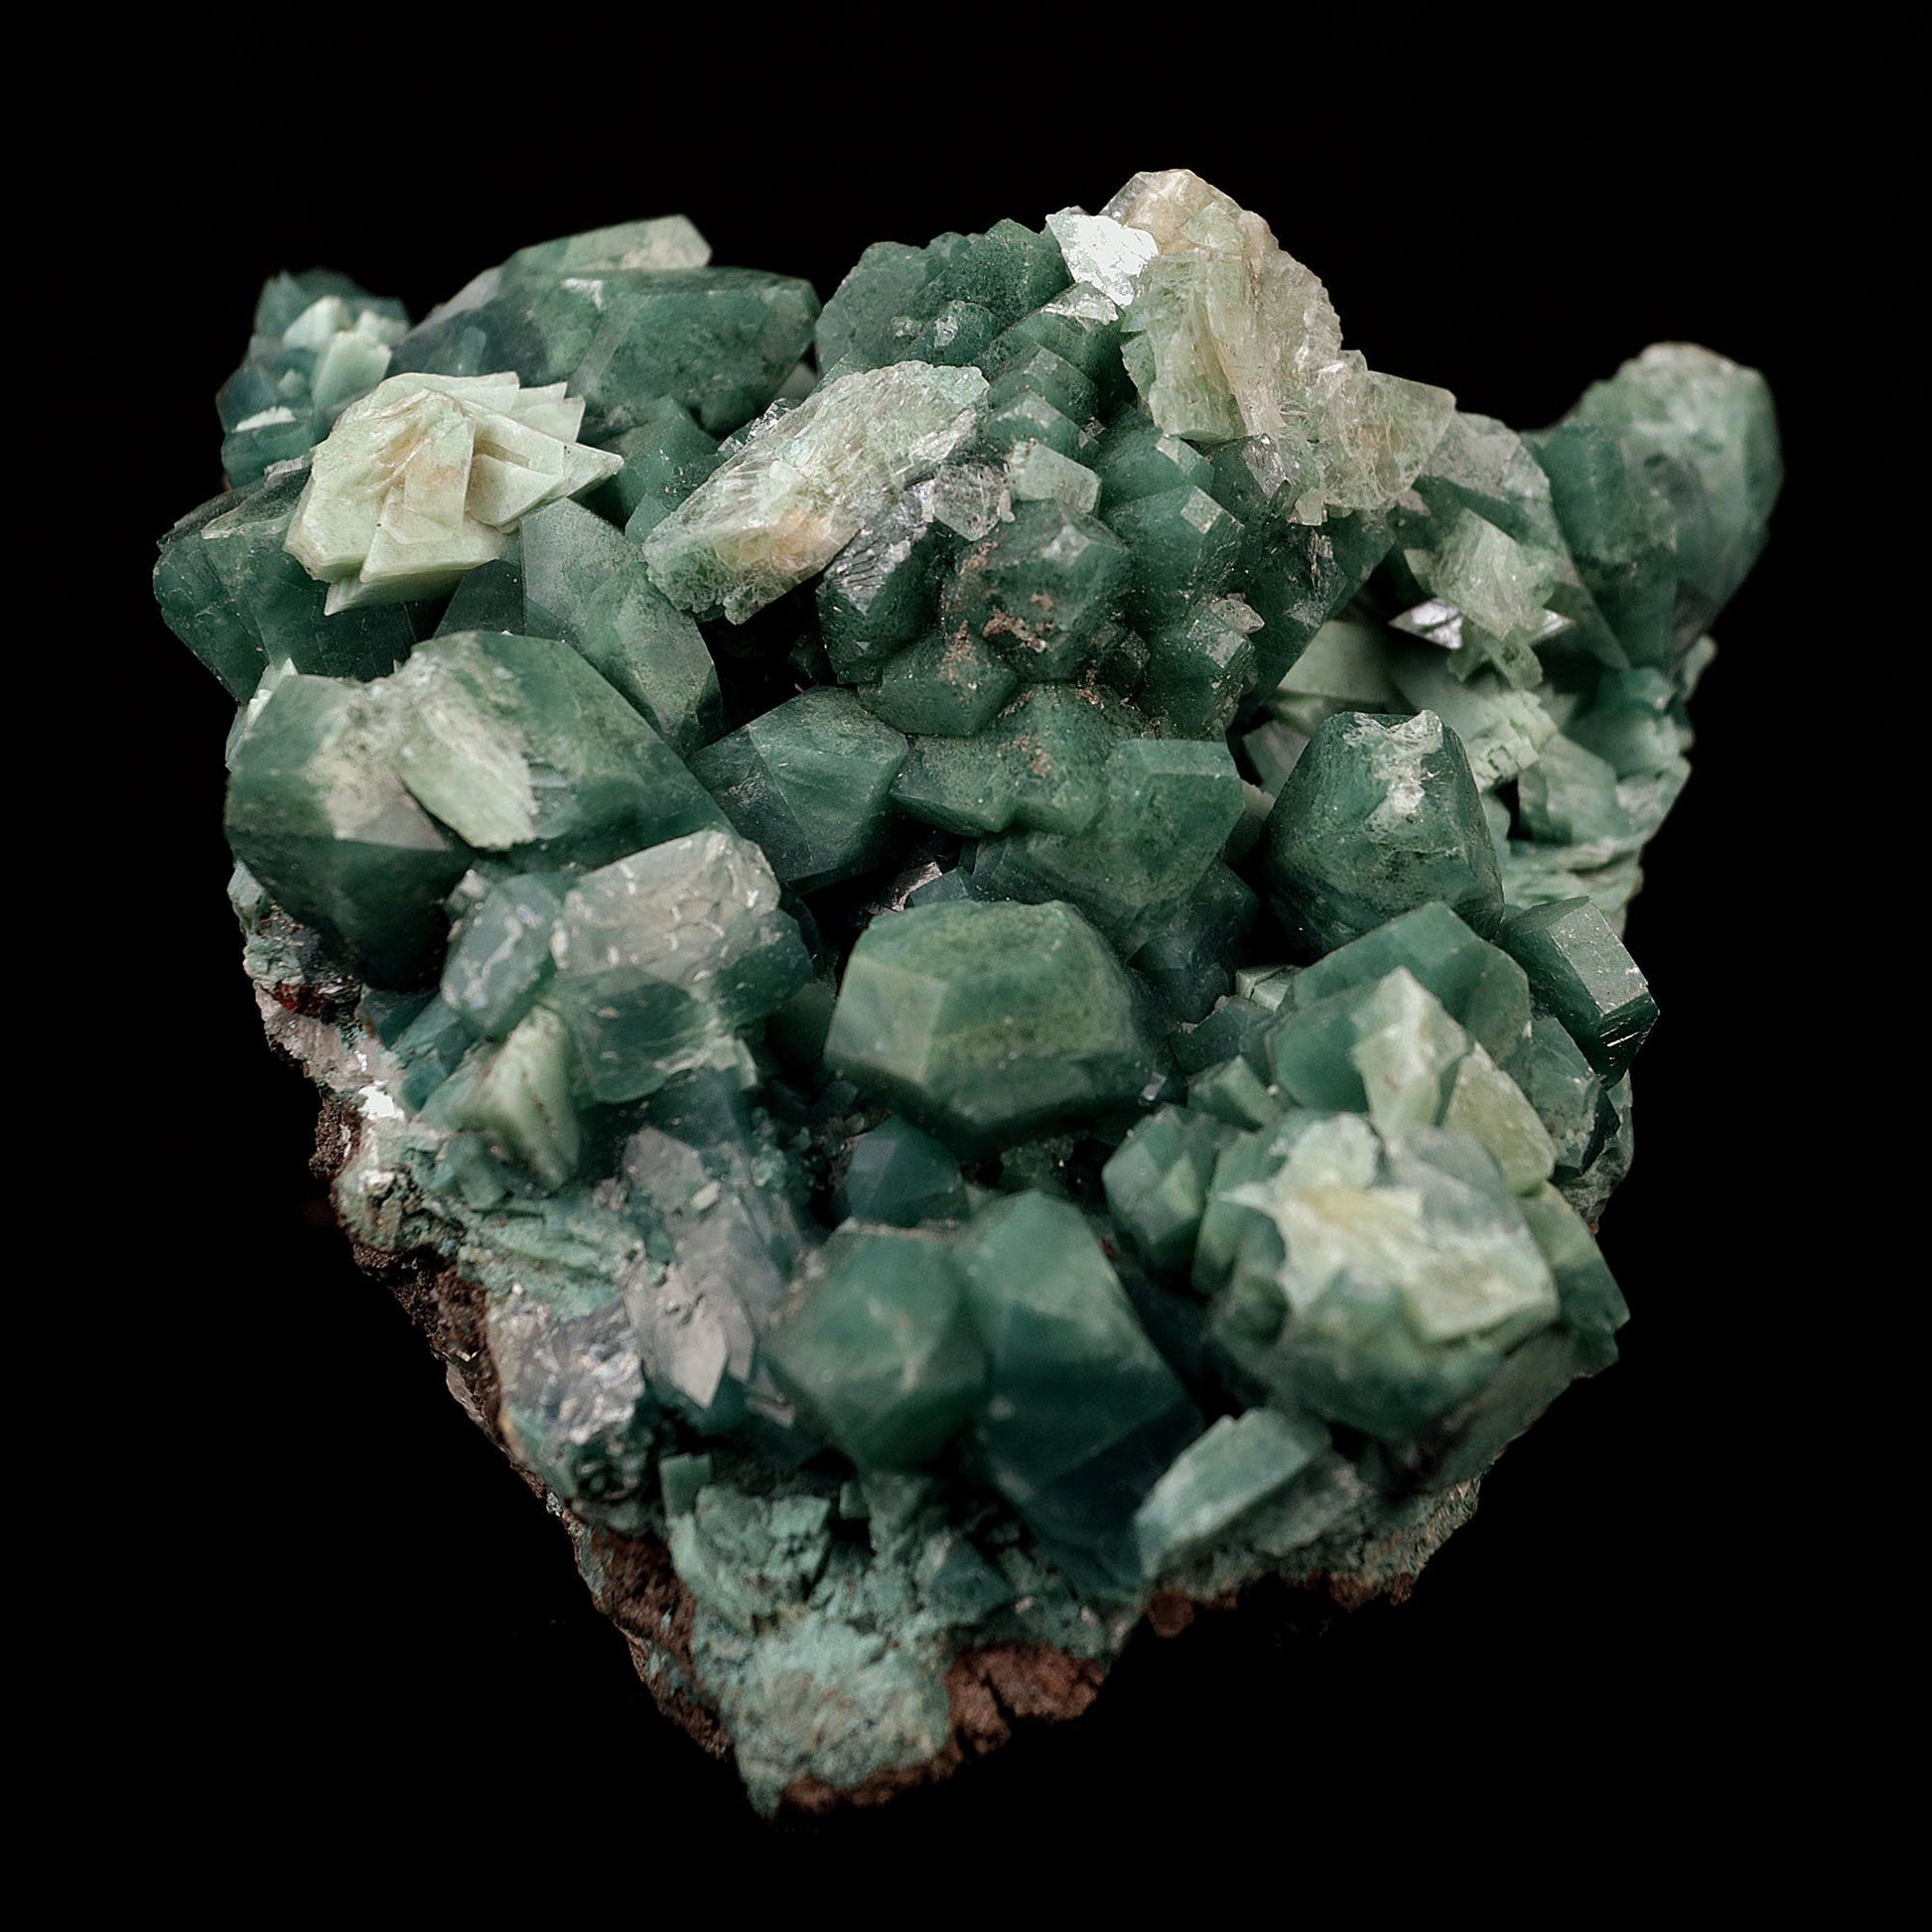 Marshy Apophyllite with Heulandite Natural Mineral Specimen # B 4205  https://www.superbminerals.us/products/marshy-apophyllite-with-heulandite-natural-mineral-specimen-b-4205  Features:An uncommon blossom of ended green Marshy Apophyllite group. The word Marshy when alluded alongside a mineral alludes to the incorporation of Chlorite in the mineral which gives it the dull green tone.Primary Mineral(s): Marshy ApophylliteSecondary Mineral(s): HeulanditeMatrix: N/A8 cm x 8 cm 290 Gms